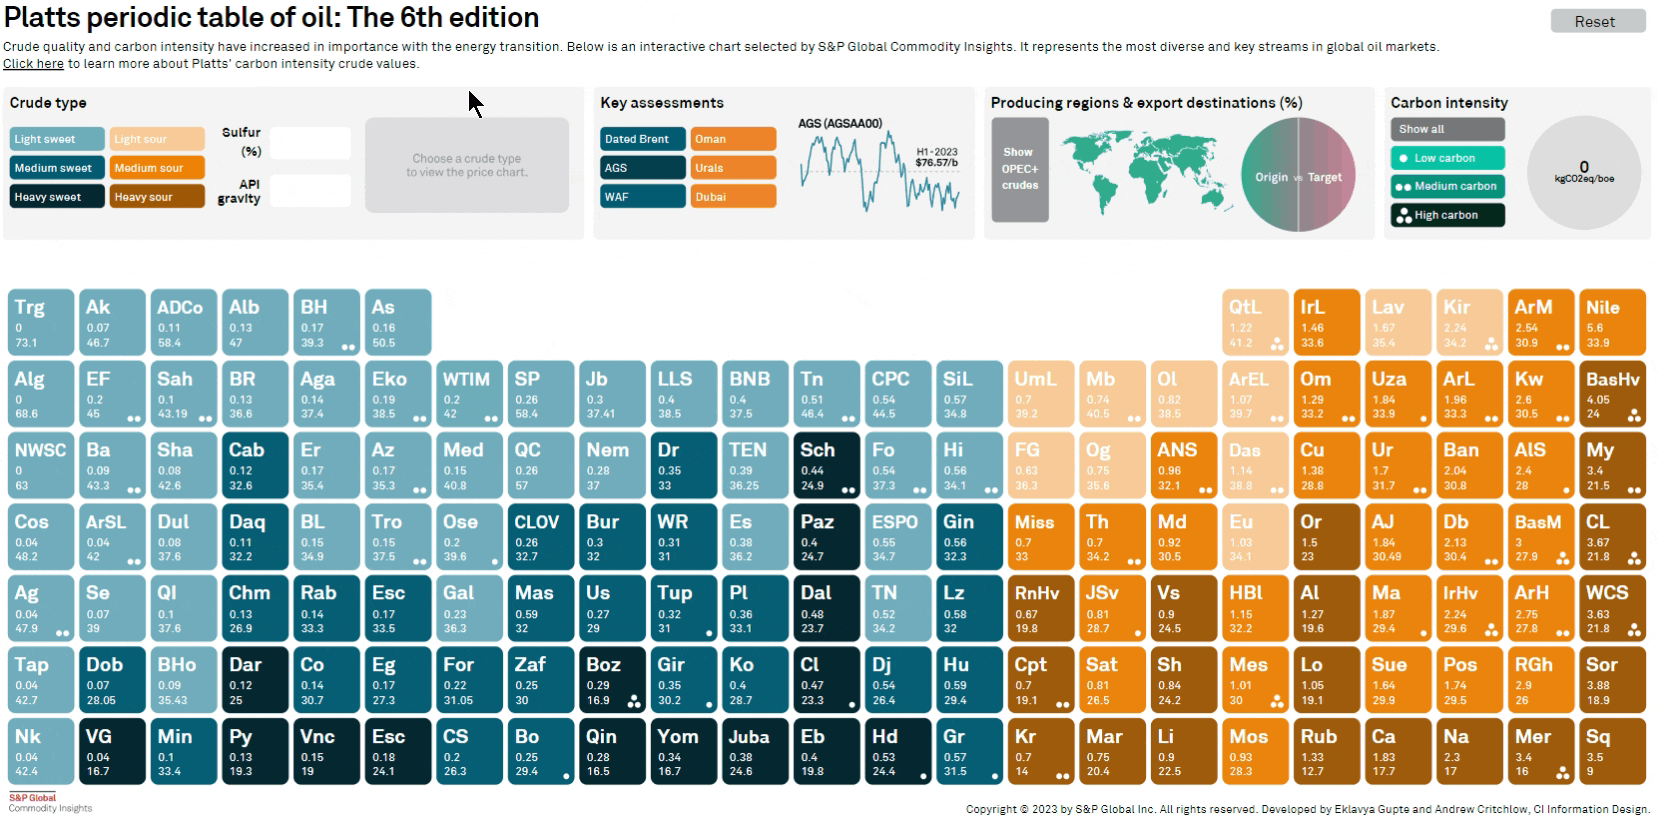 The interactive Platts Periodic Table of Oil